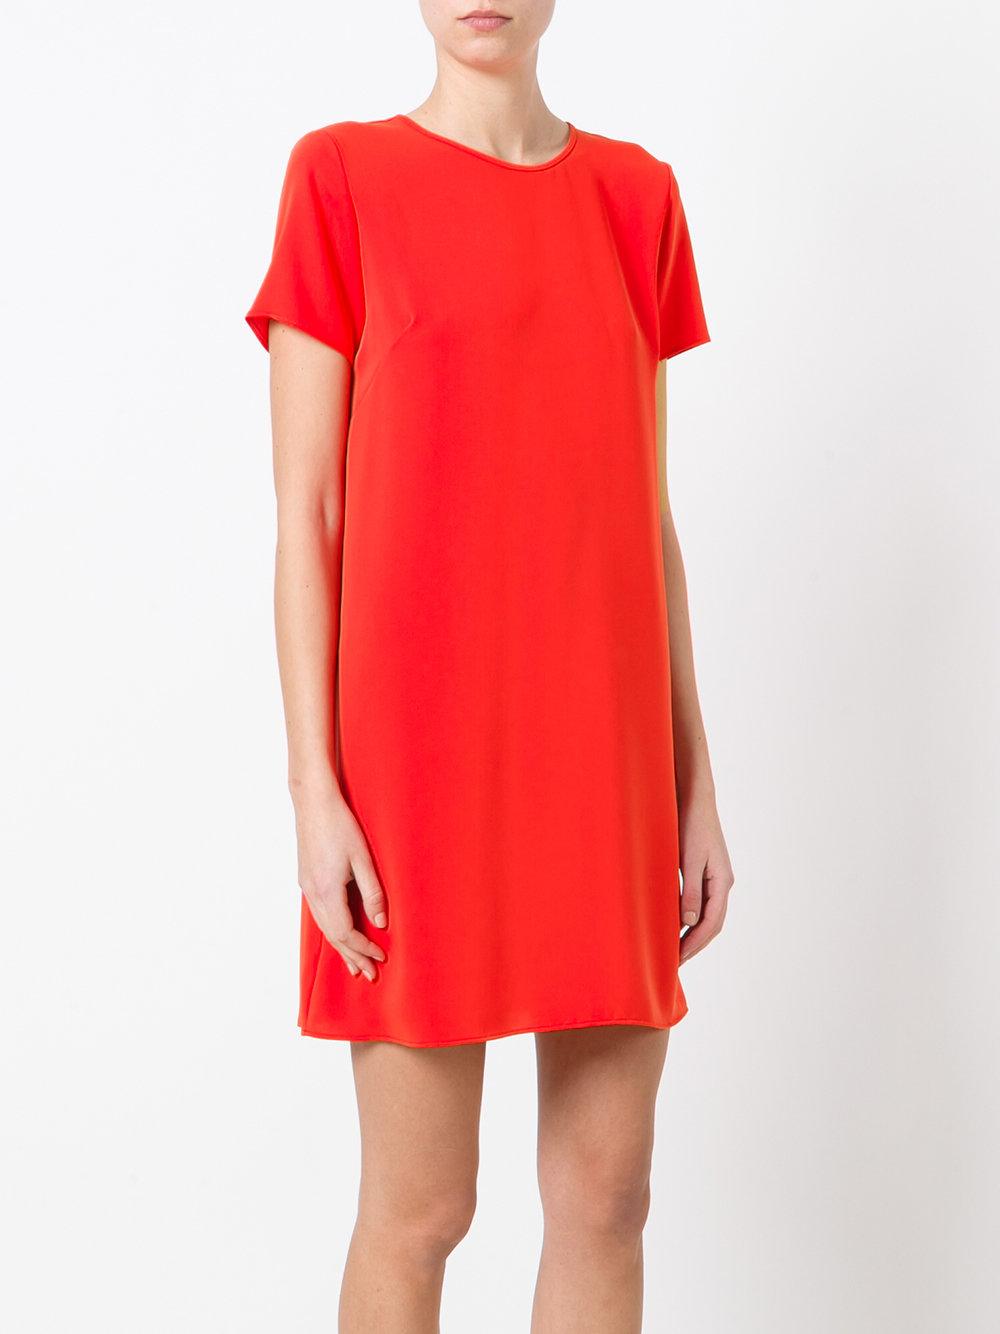 P.A.R.O.S.H. Synthetic Plain T-shirt Dress in Red - Lyst